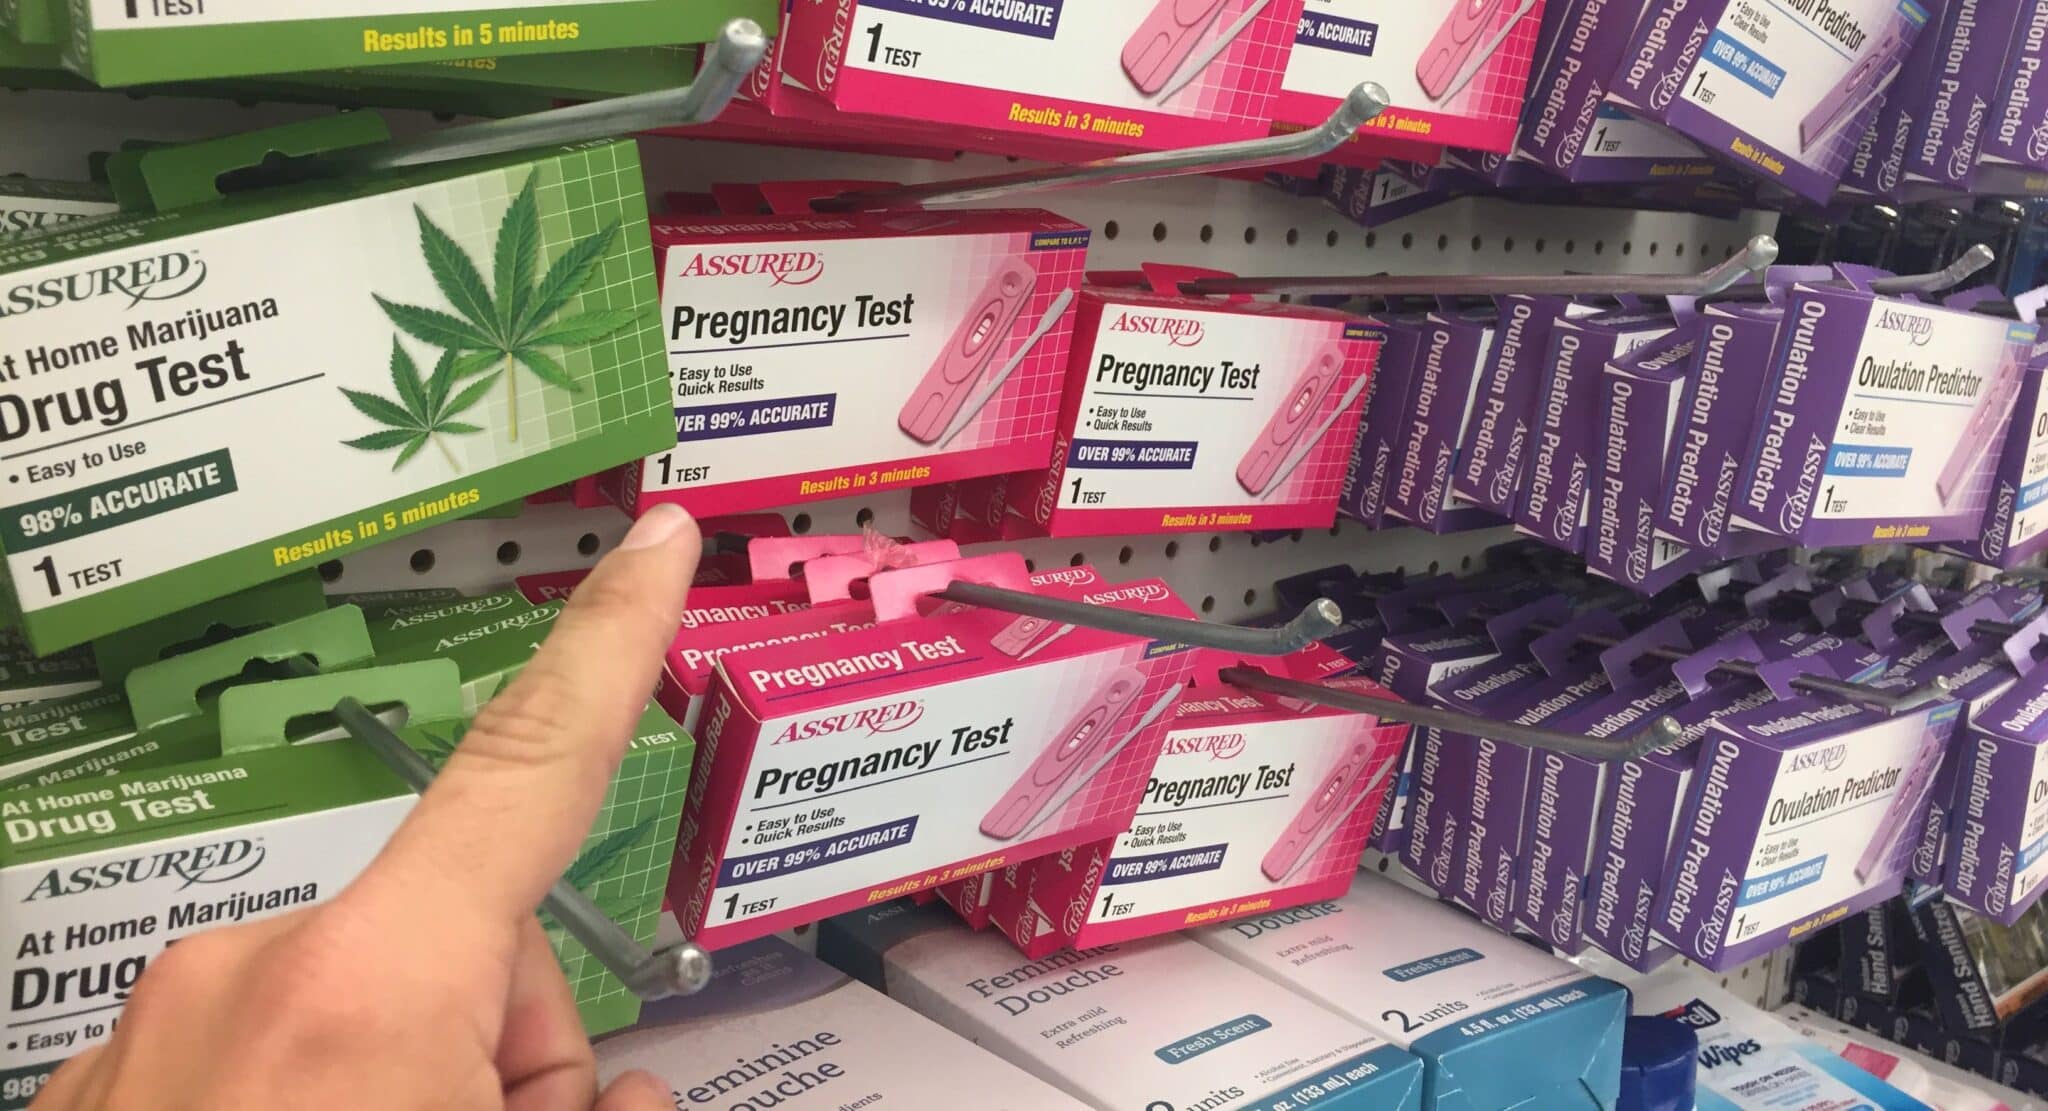 Are Dollar General Pregnancy Tests Effective? What Do They Cost?